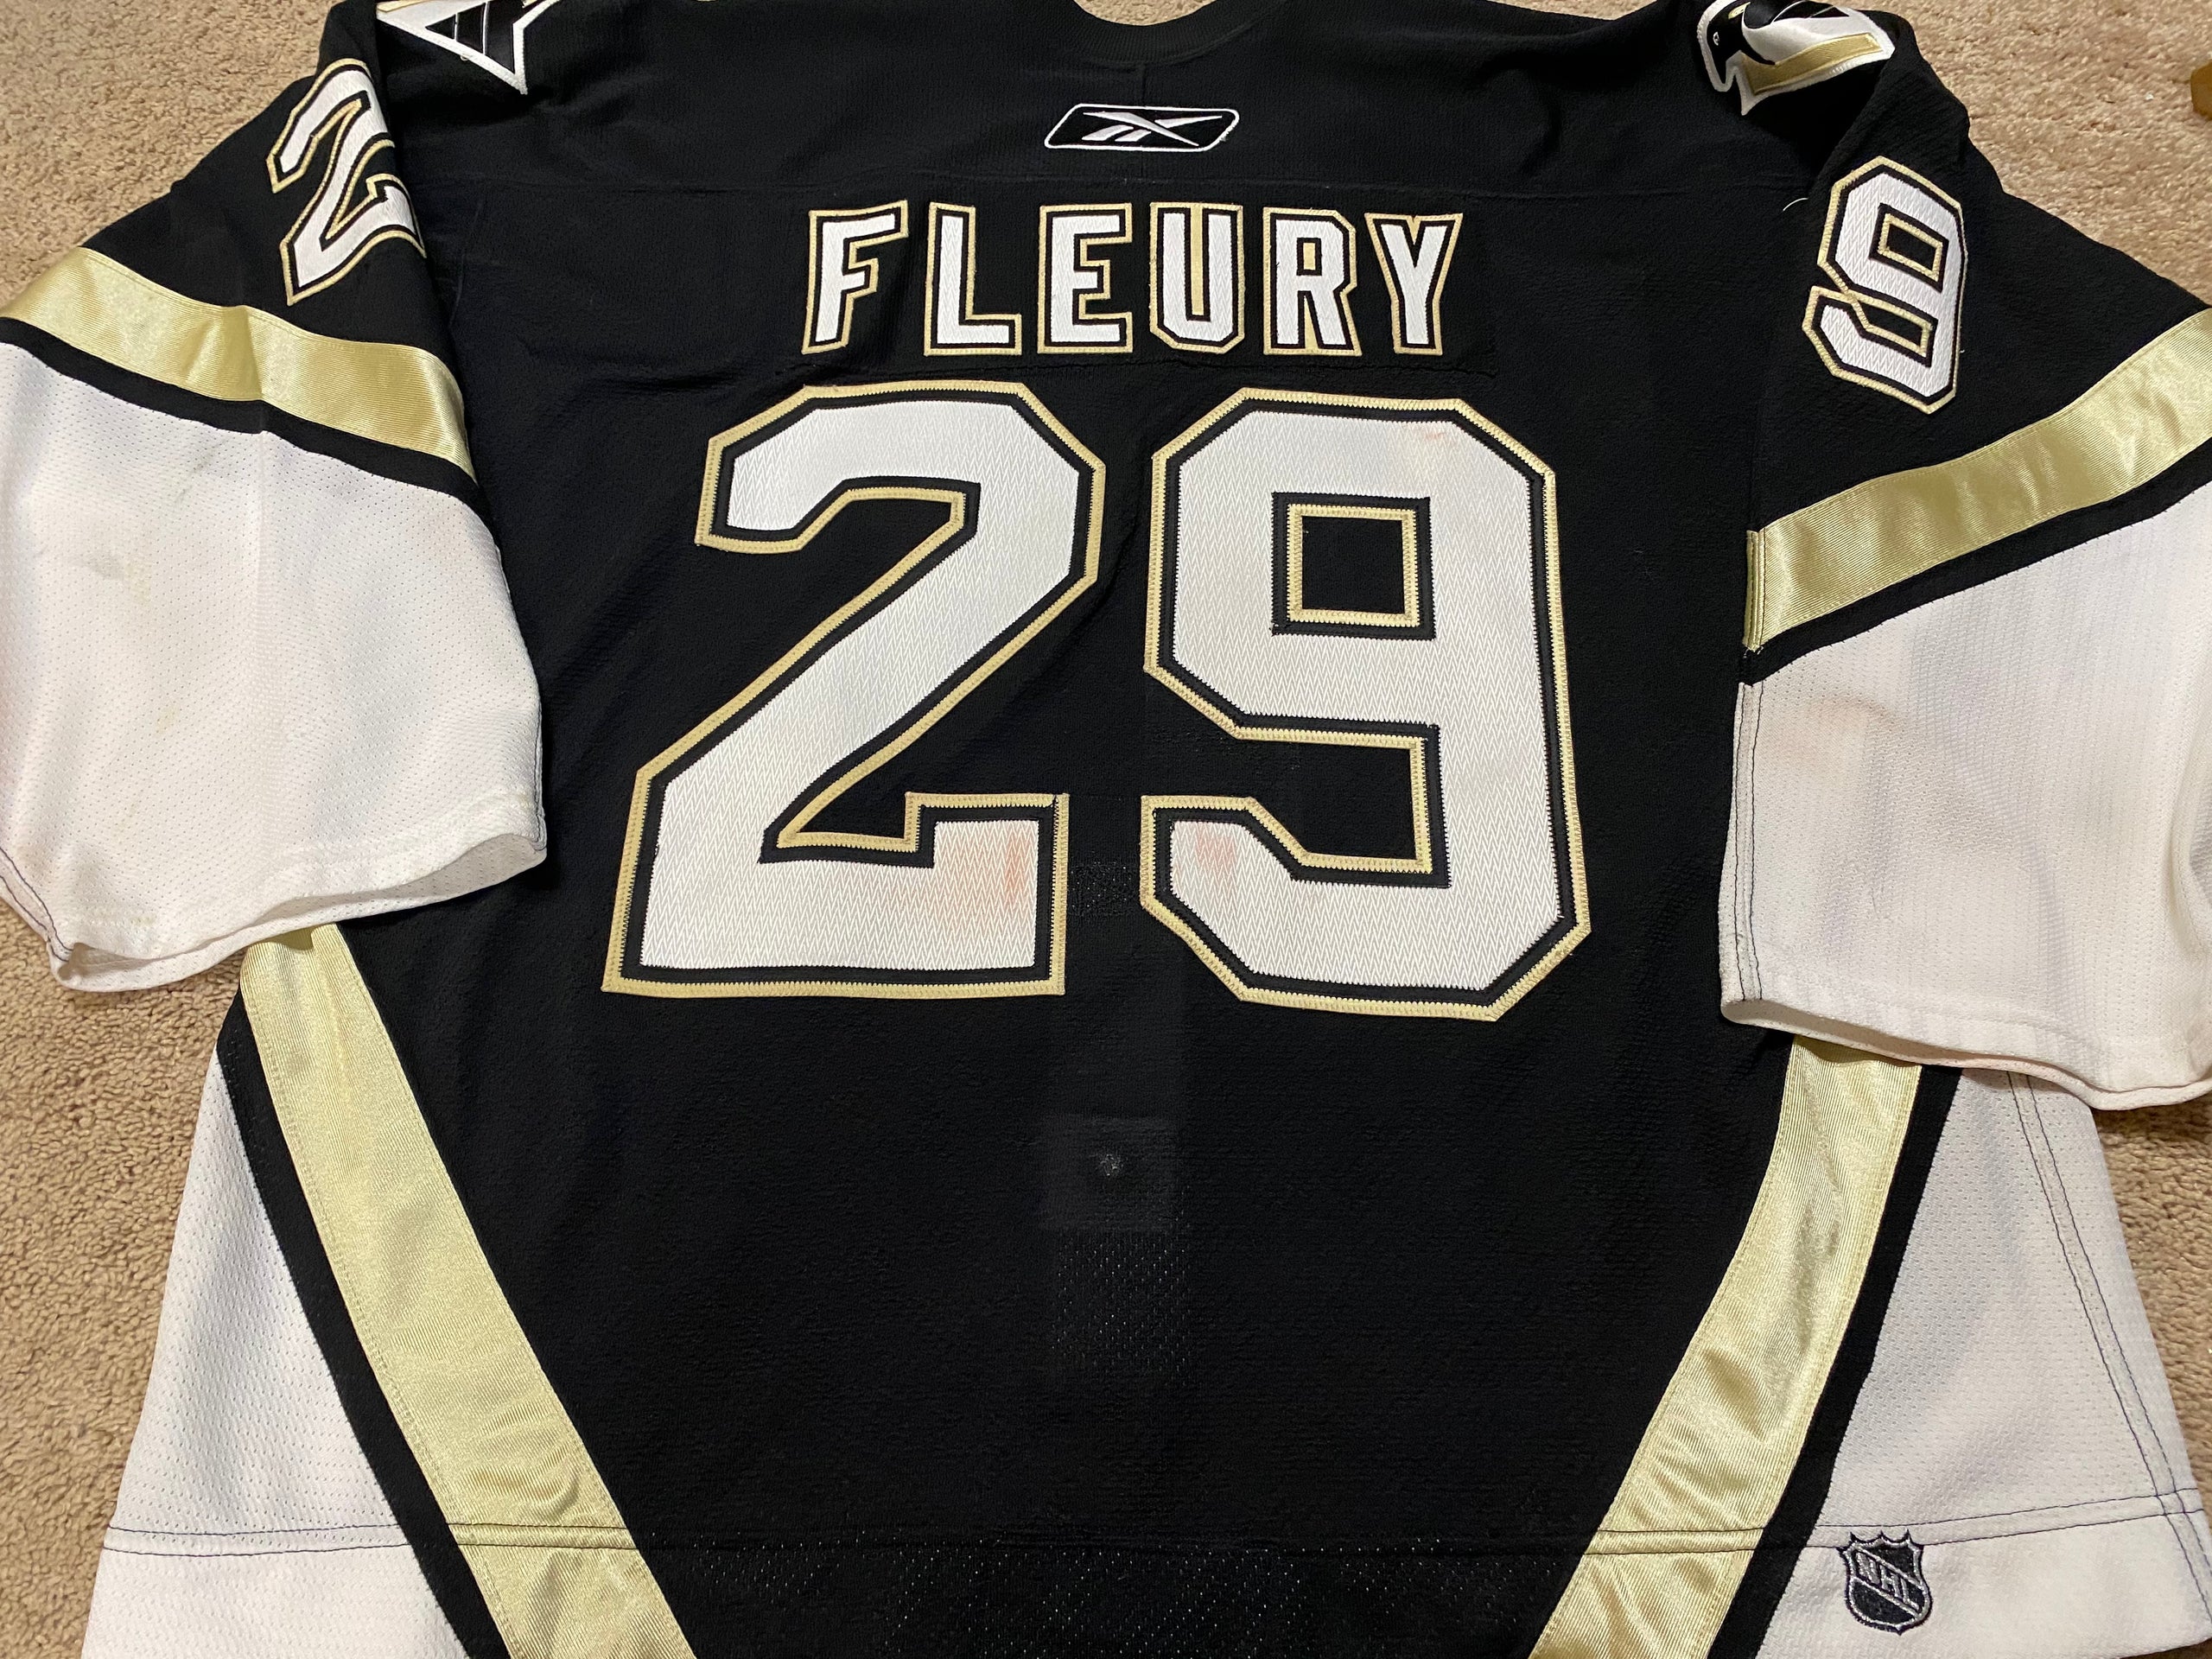 2005-06 Marc-Andre Fleury Game Worn Jersey. Hockey Collectibles